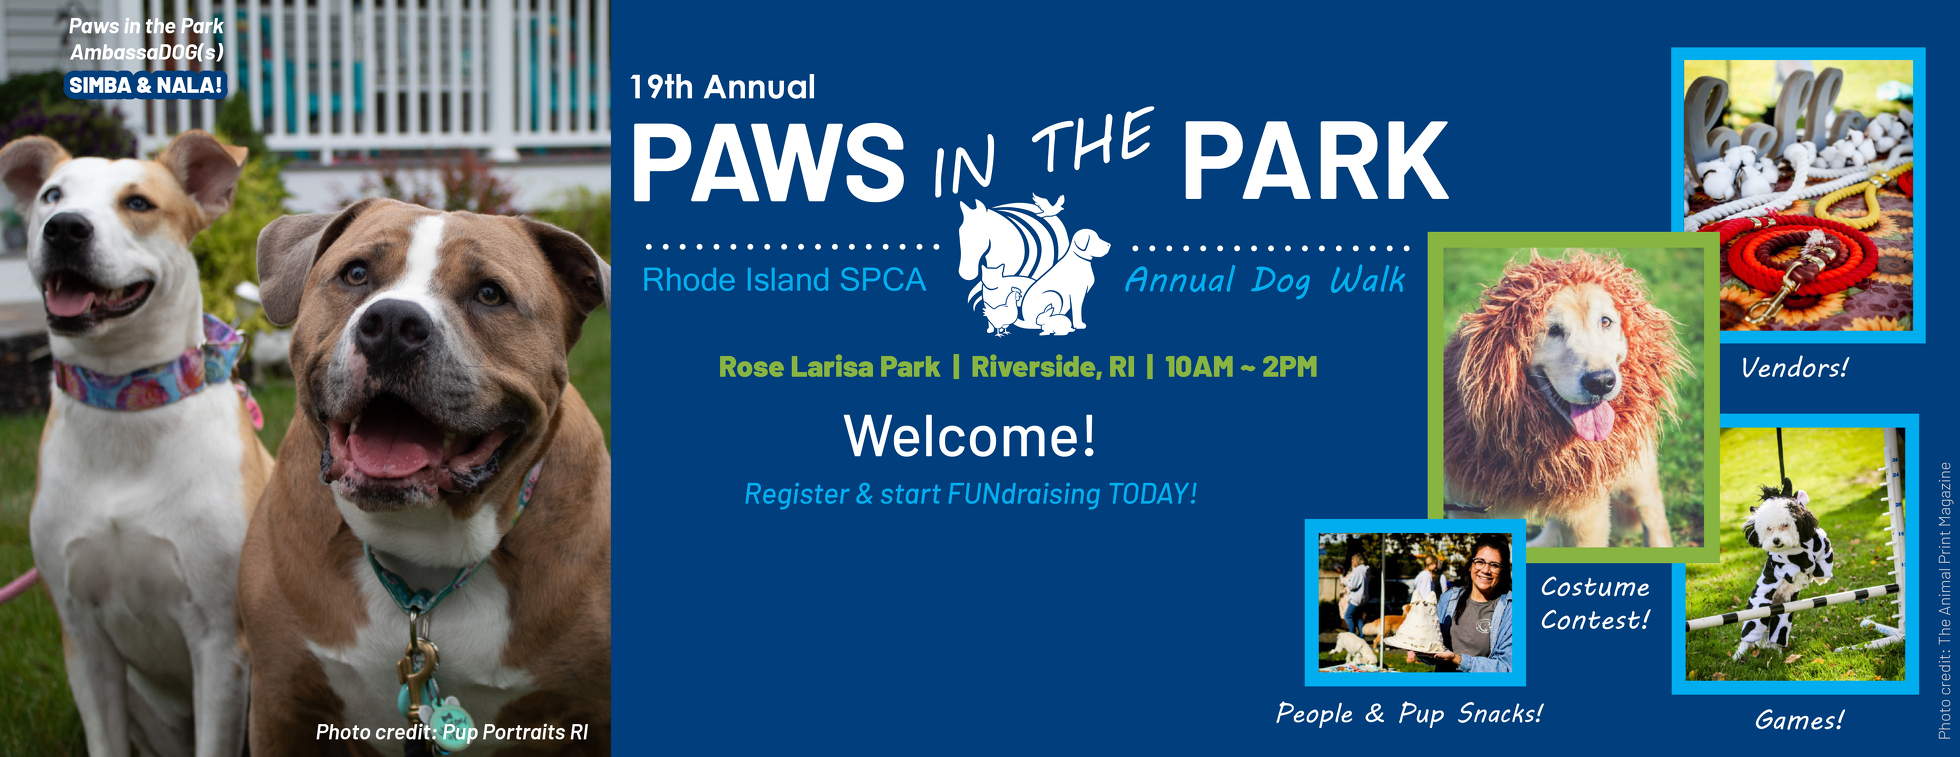 Paws in the Park 2021